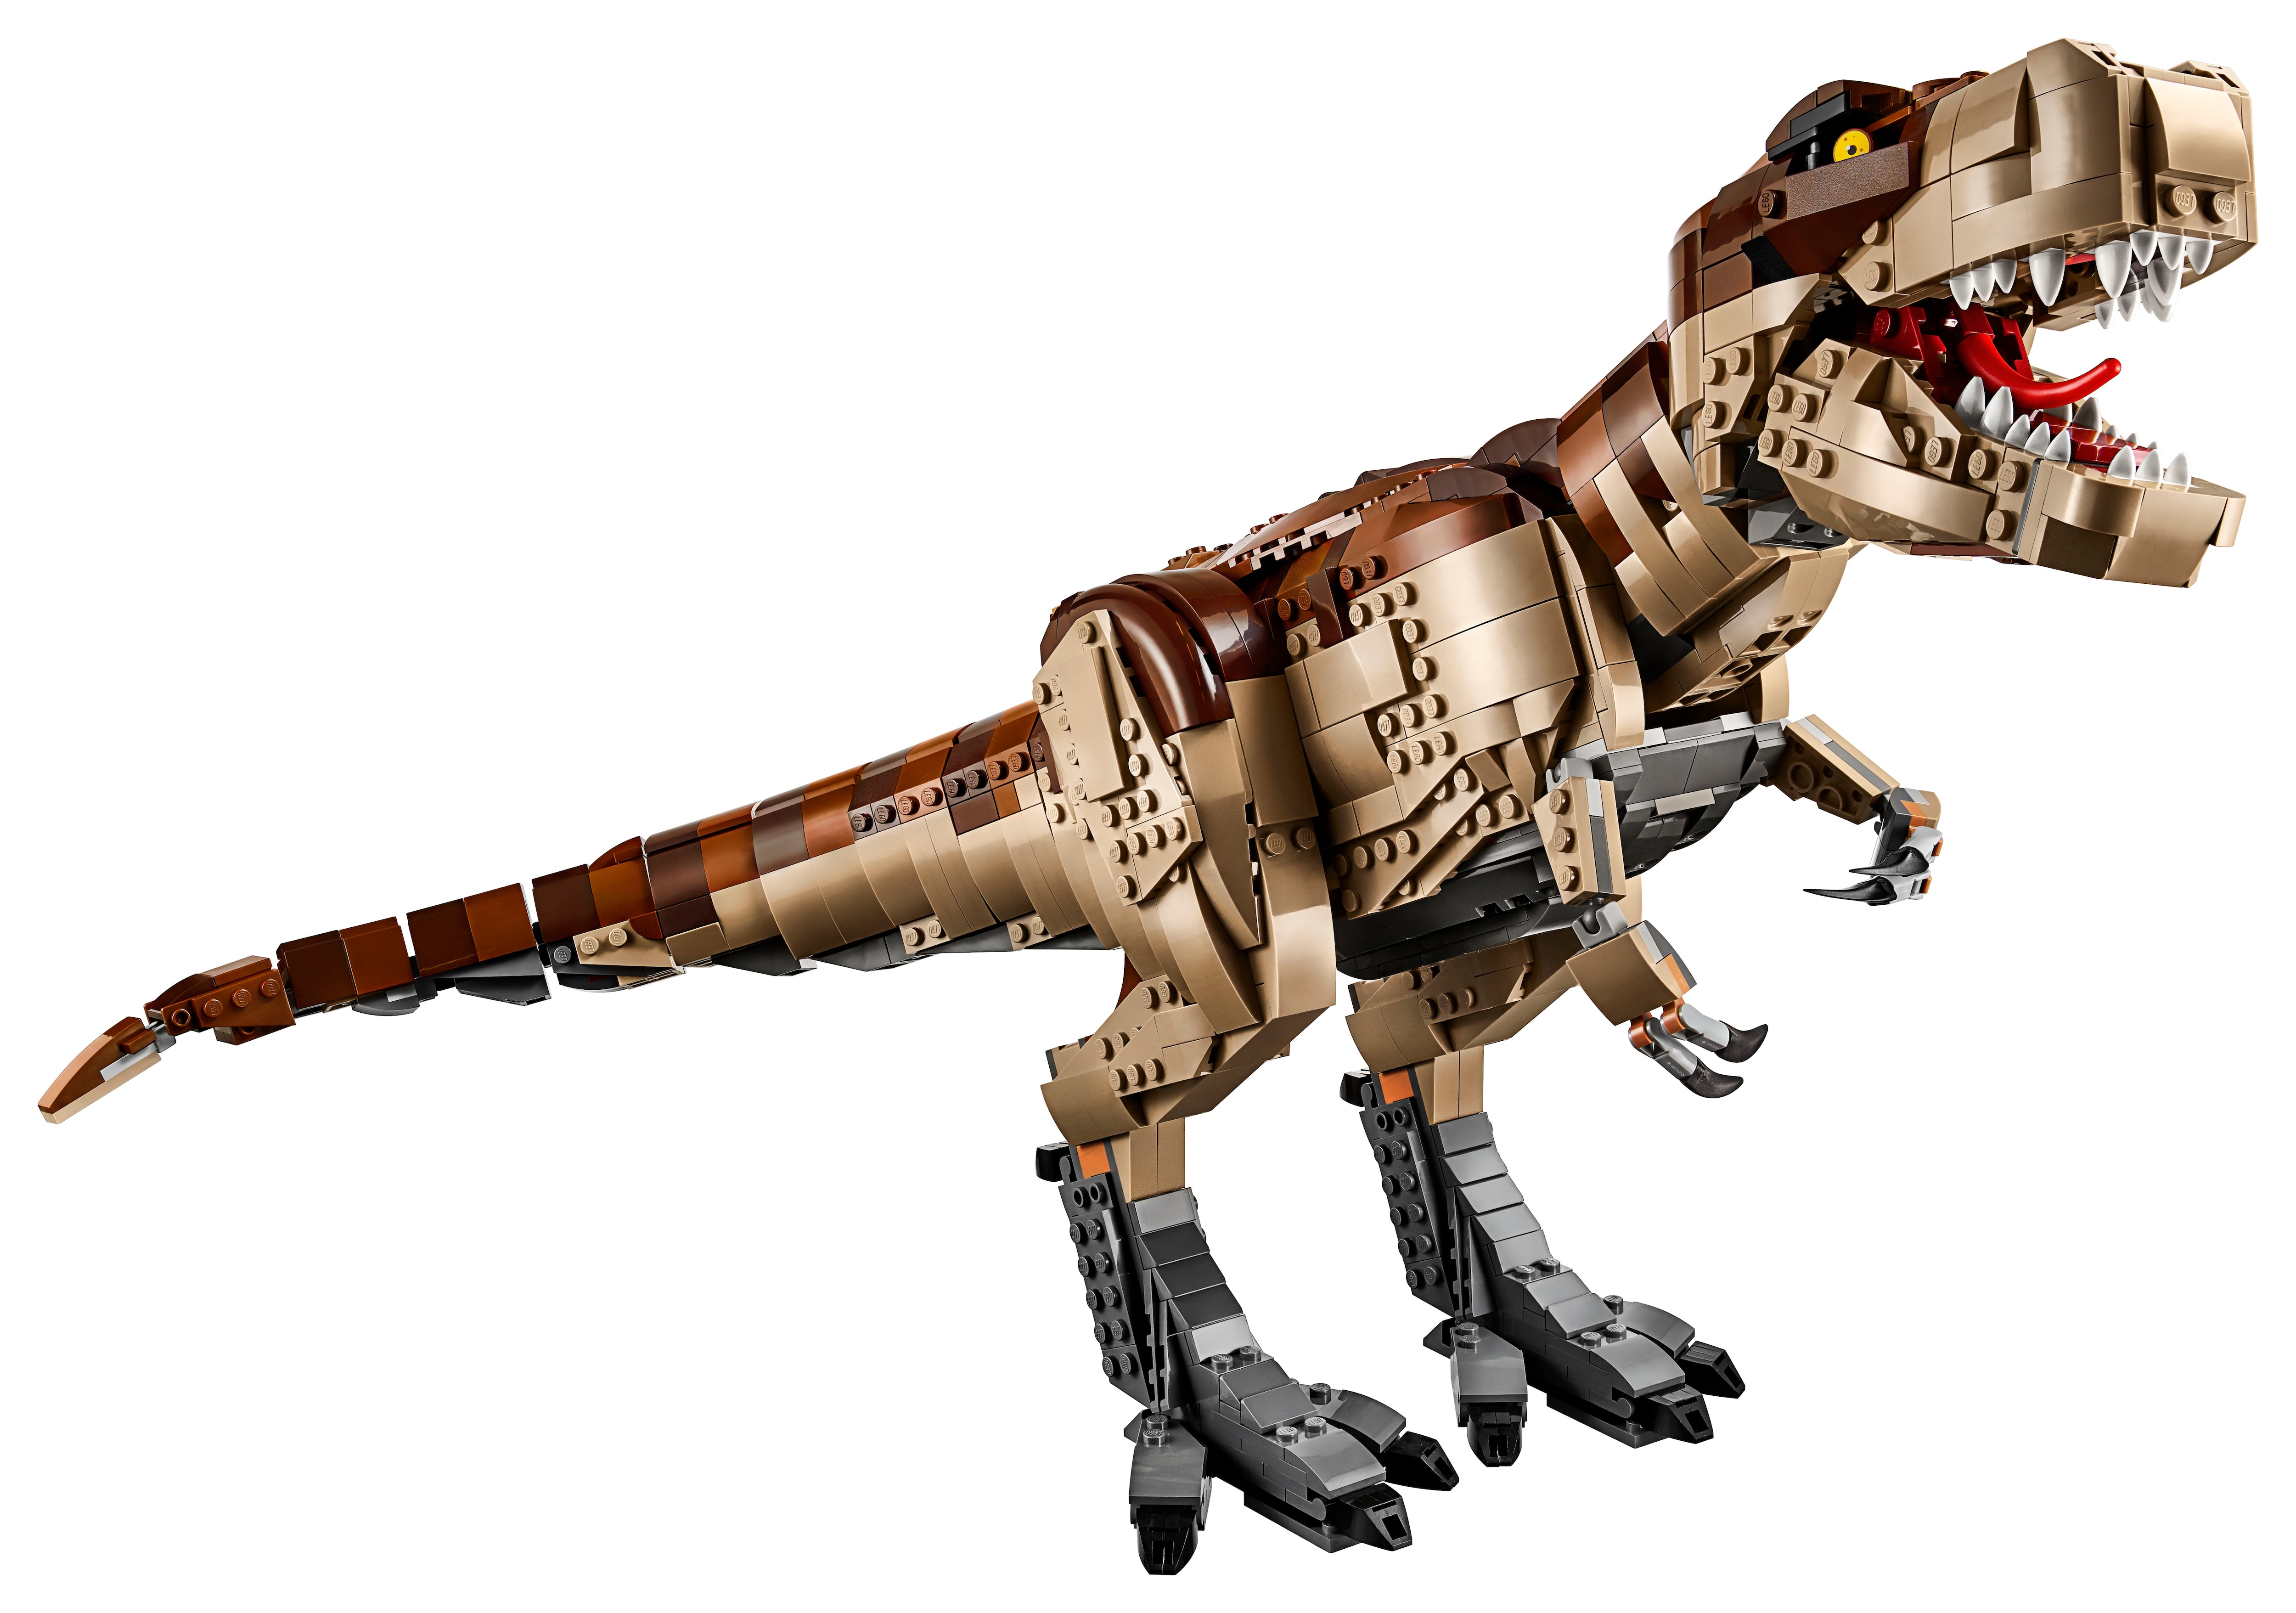 LEGO introduces the classic Jurassic Park and T. rex SYFY WIRE